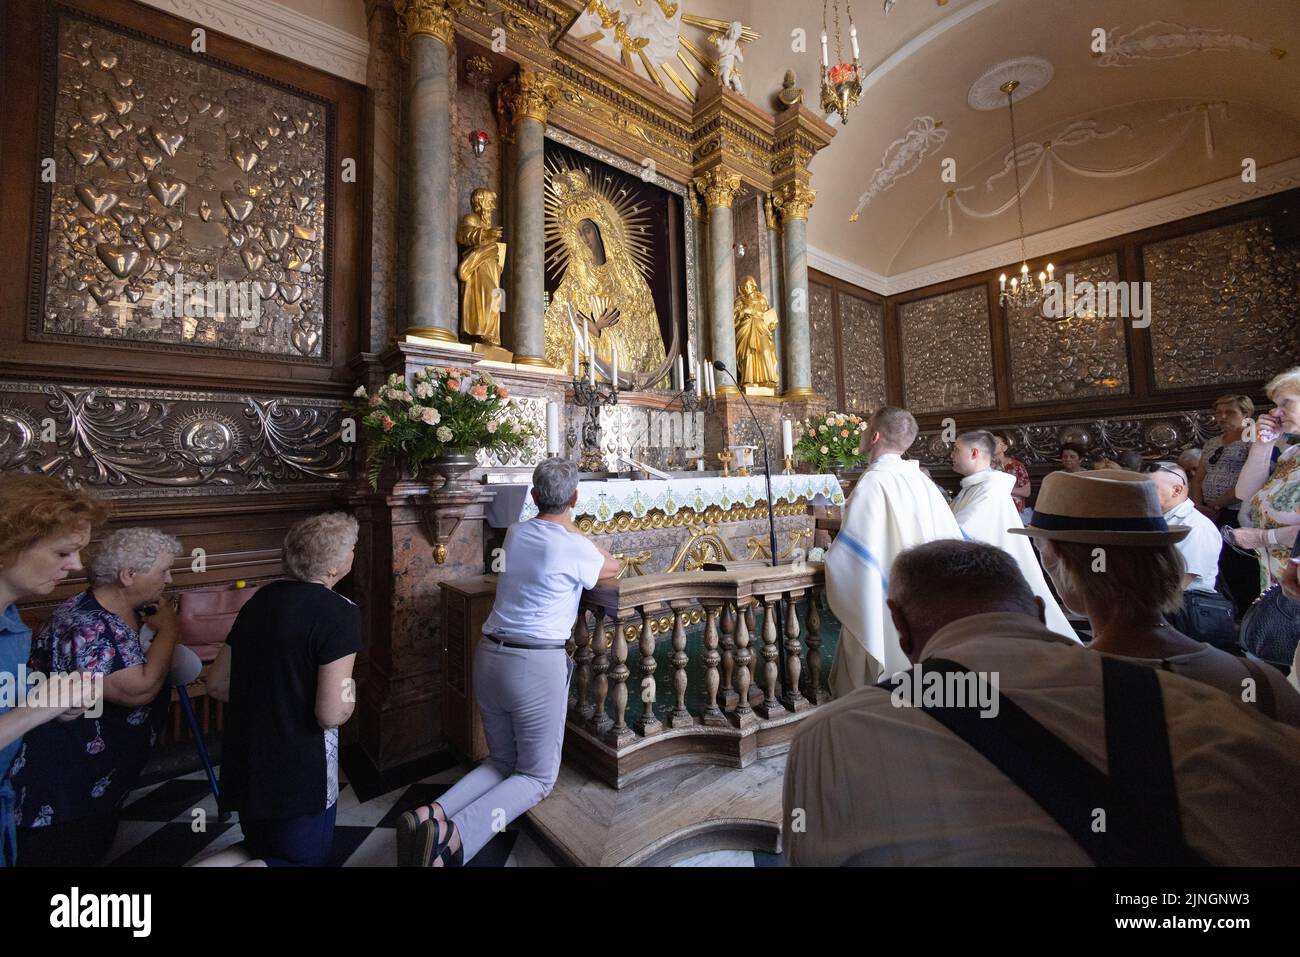 Worshippers at the Black Madonna, or Our Lady of the Gate of Dawn, a Christian icon, Chapel of the Gate of Dawn, Vilnius Lithuania Stock Photo